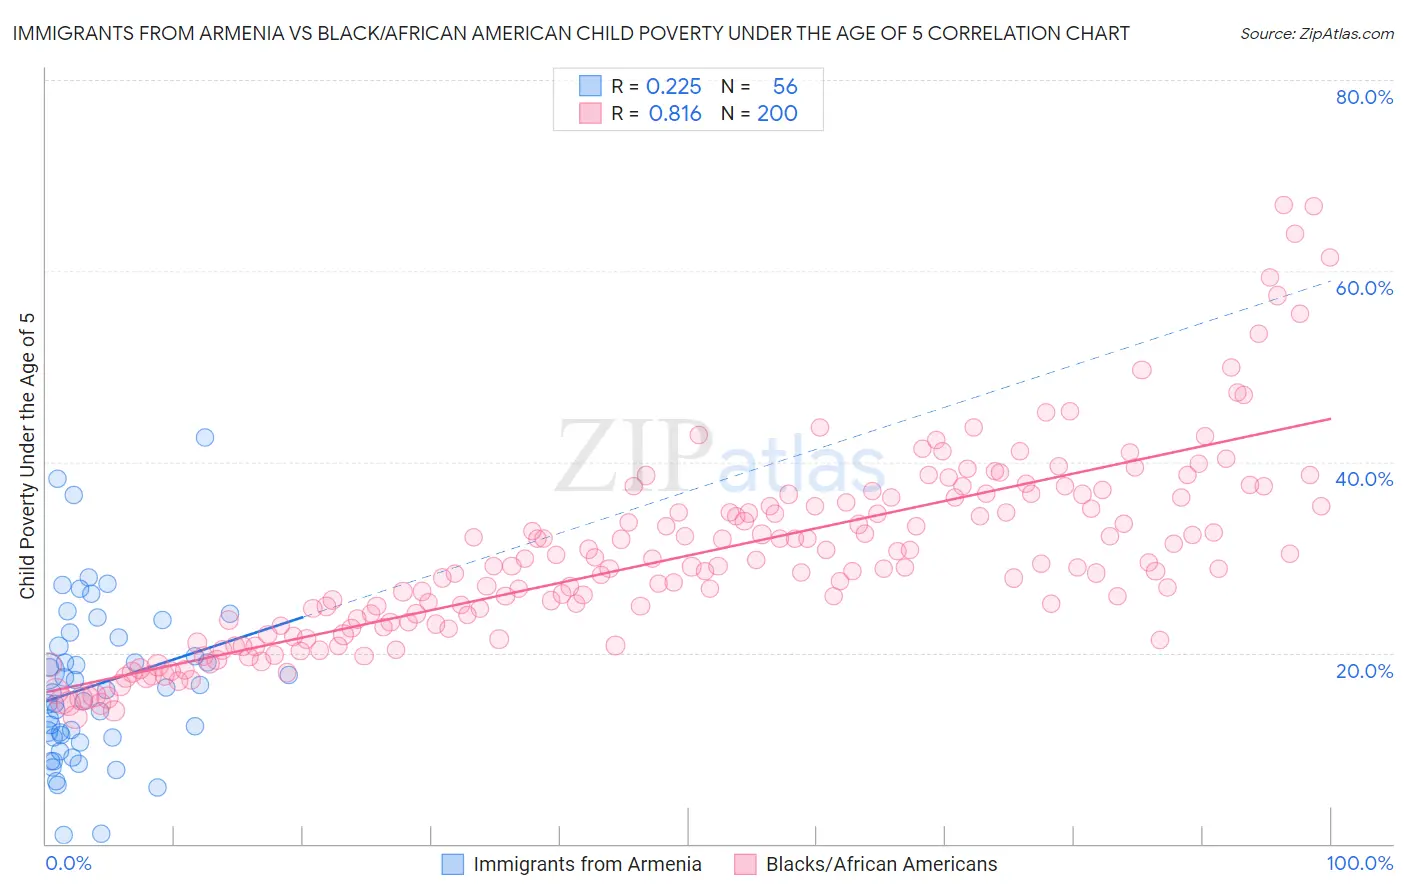 Immigrants from Armenia vs Black/African American Child Poverty Under the Age of 5